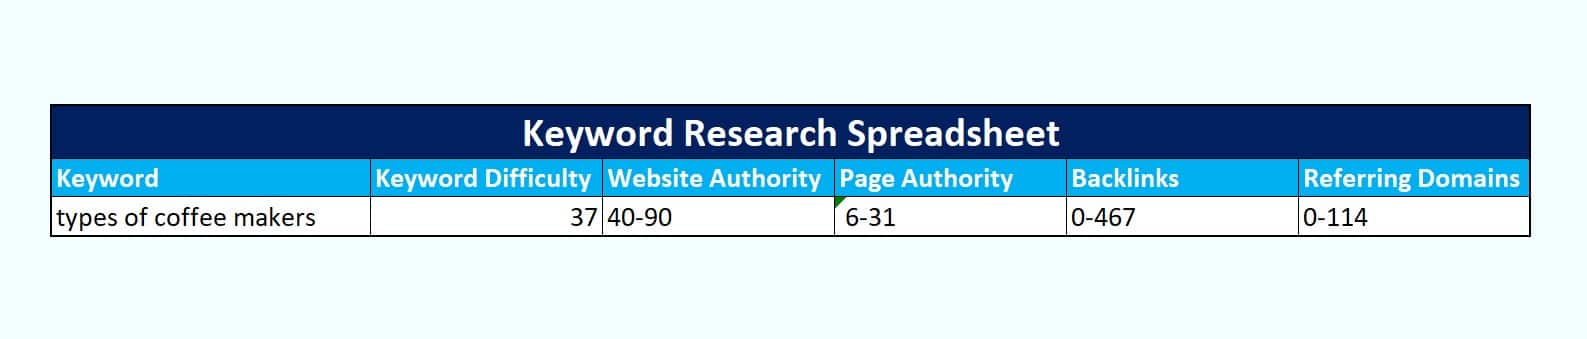 keyword research spreadsheet completed using competitor research tool to find true keyword difficulty